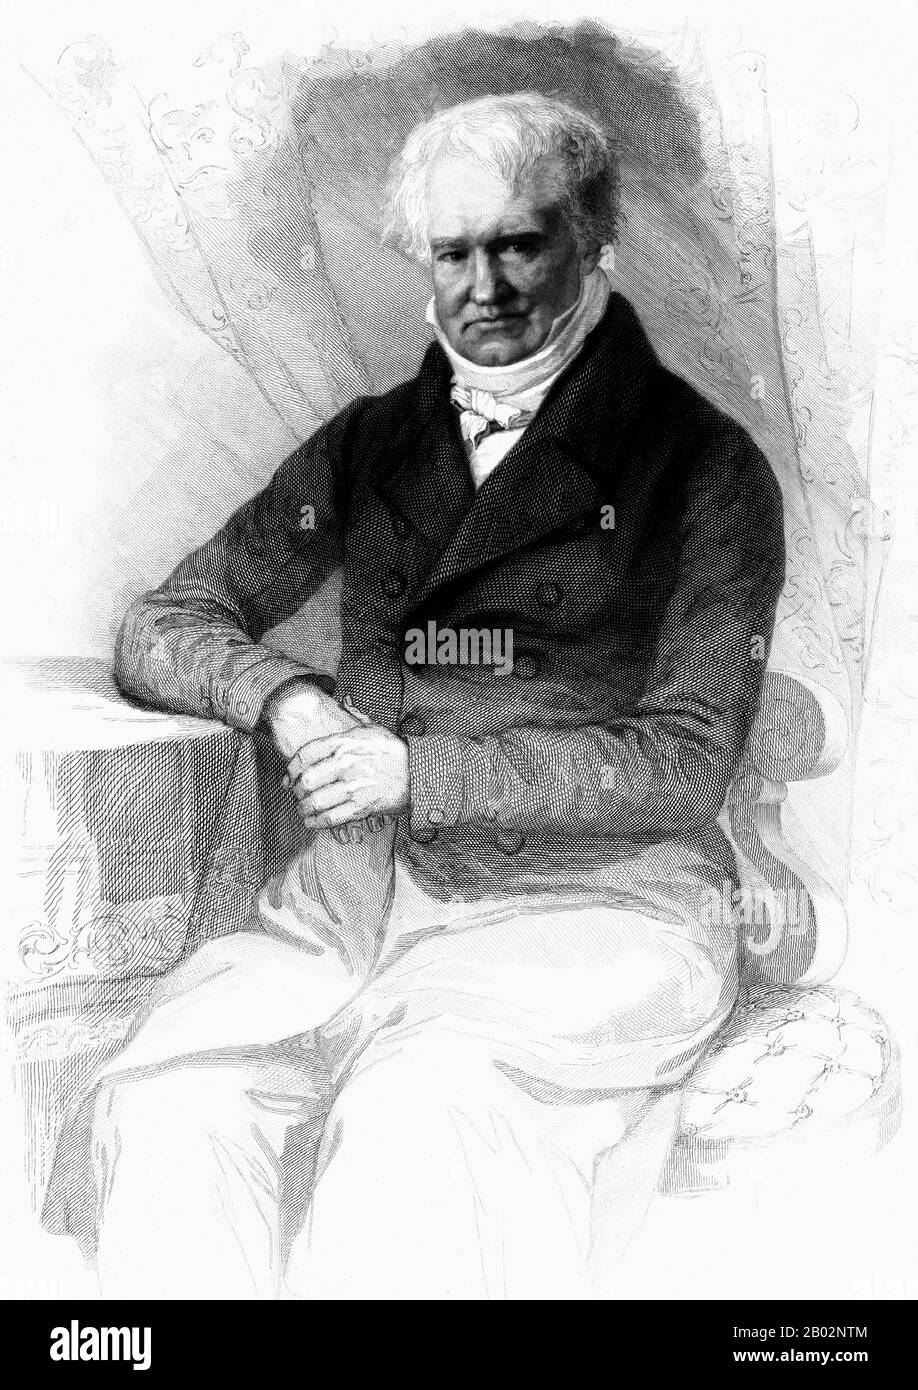 Friedrich Wilhelm Heinrich Alexander von Humboldt was a Prussian geographer, naturalist, and explorer, and the younger brother of the Prussian minister, philosopher and linguist Wilhelm von Humboldt (1767–1835). Humboldt's quantitative work on botanical geography laid the foundation for the field of biogeography.  Between 1799 and 1804, Humboldt travelled extensively in Latin America, exploring and describing it for the first time from a modern scientific point of view. His description of the journey was written up and published in an enormous set of volumes over 21 years. He was one of the fi Stock Photo